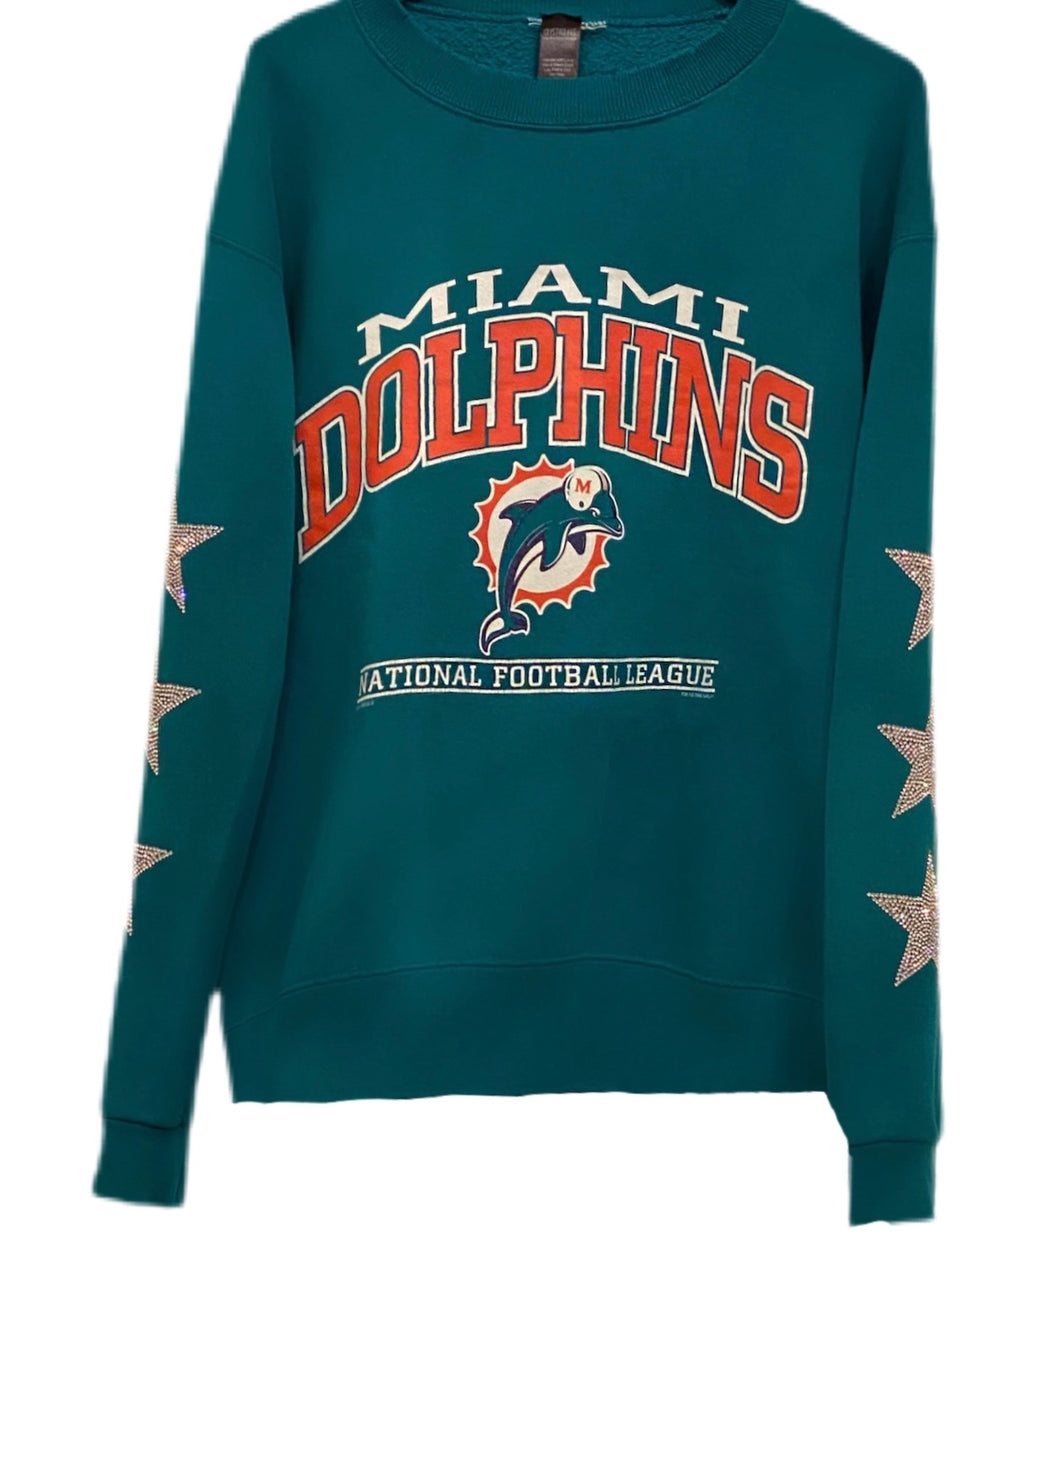 Miami Dolphins, NFL One of a KIND Vintage Sweatshirt with Three Crystal Star Design